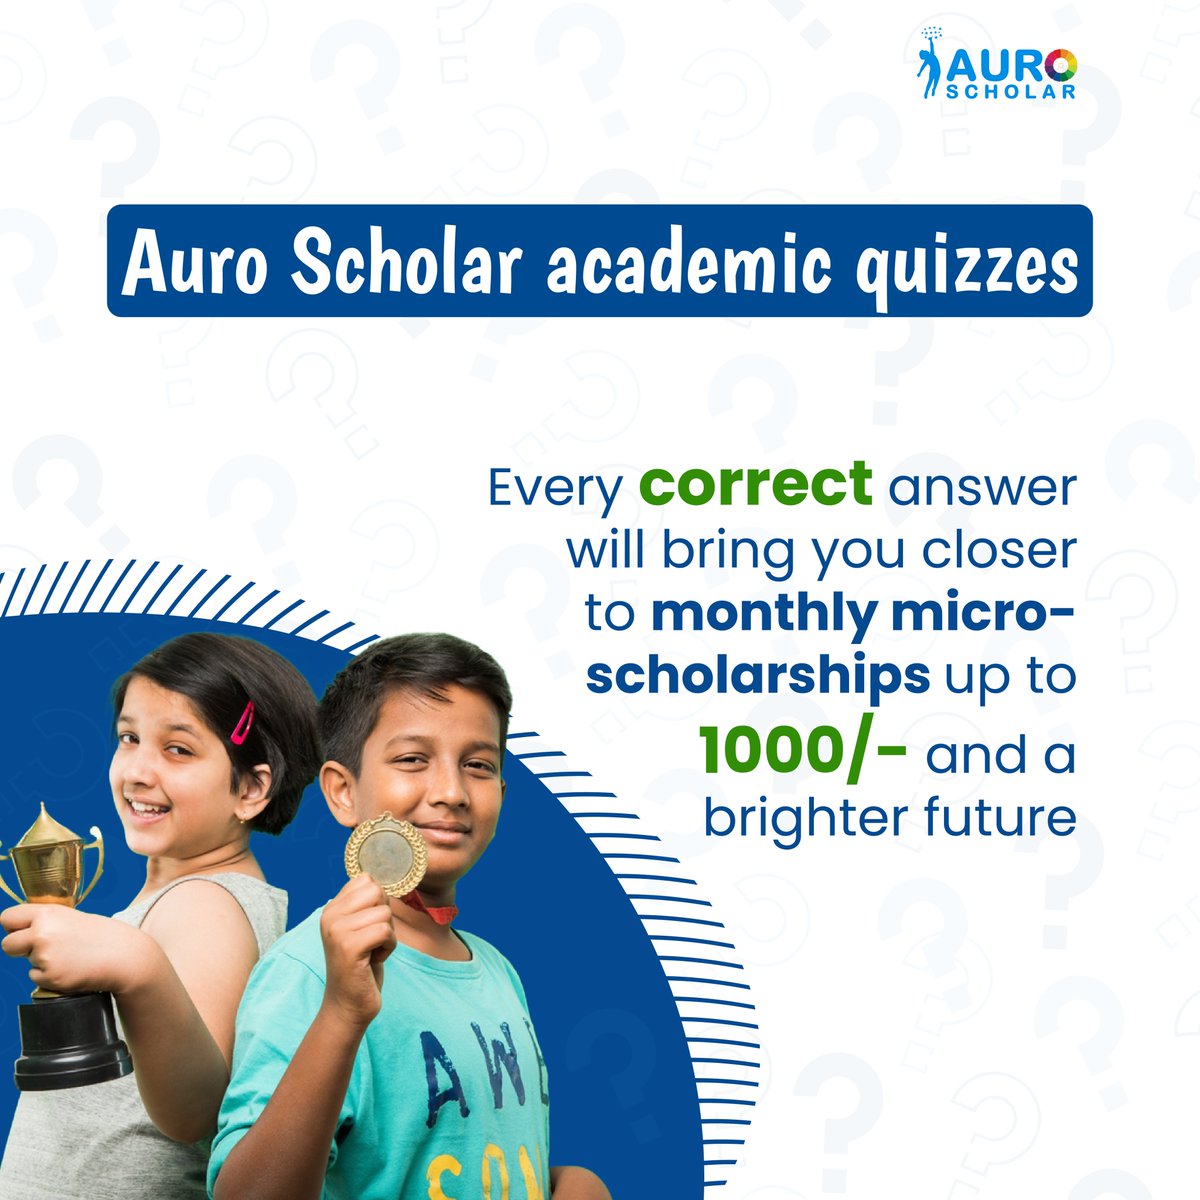 Download the Auro Scholar app, Register for free, participate in subject based quizzes, enhance your learning levels, and get monthly scholarships up to Rs. 1000/- 

App link : bit.ly/3PN7x54

#scholarships #education #scholarshipopportunities #student